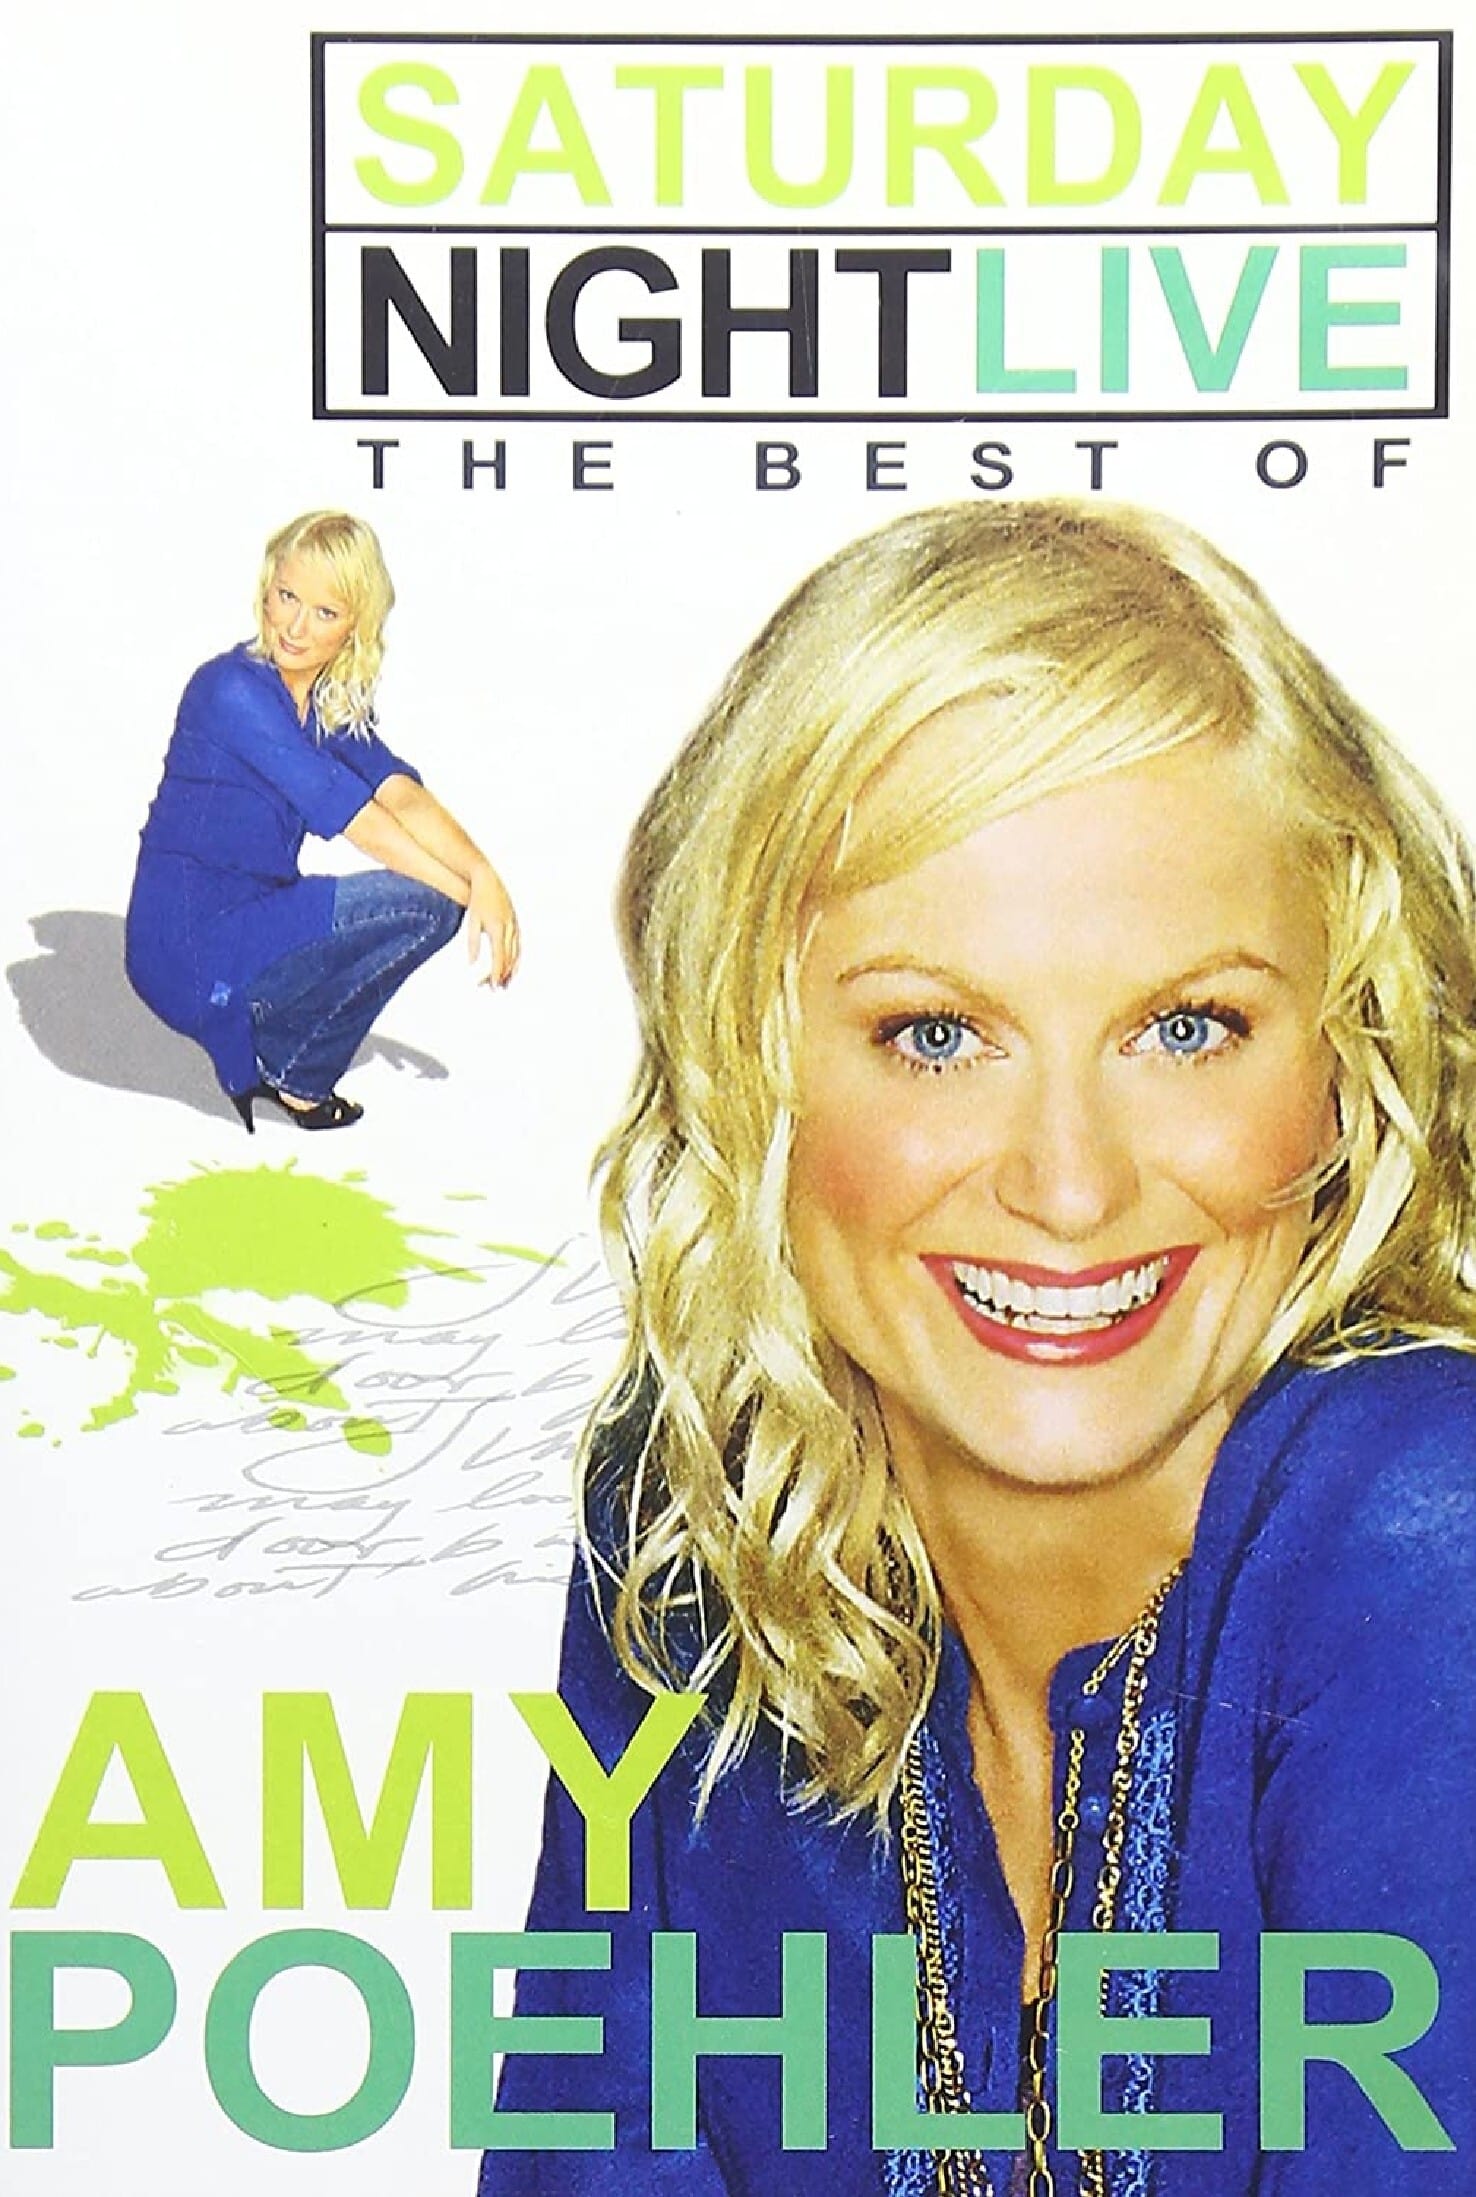 Saturday Night Live: The Best of Amy Poehler (2009)